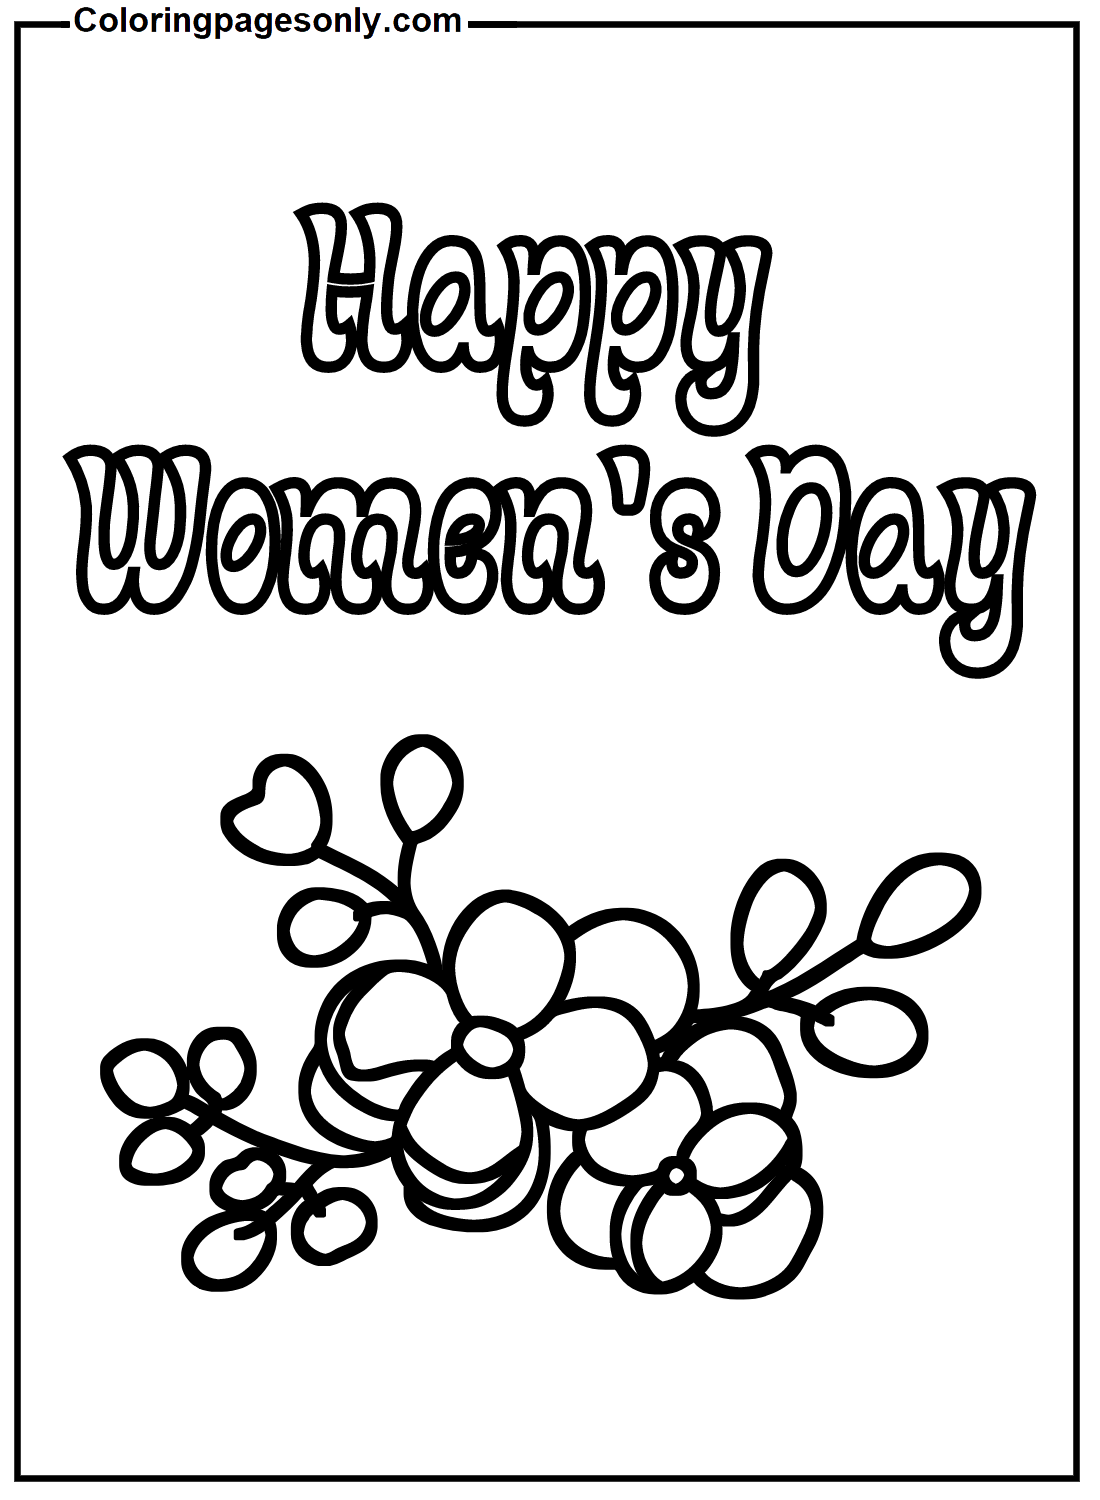 Happy Women's Day Image Coloring Pages